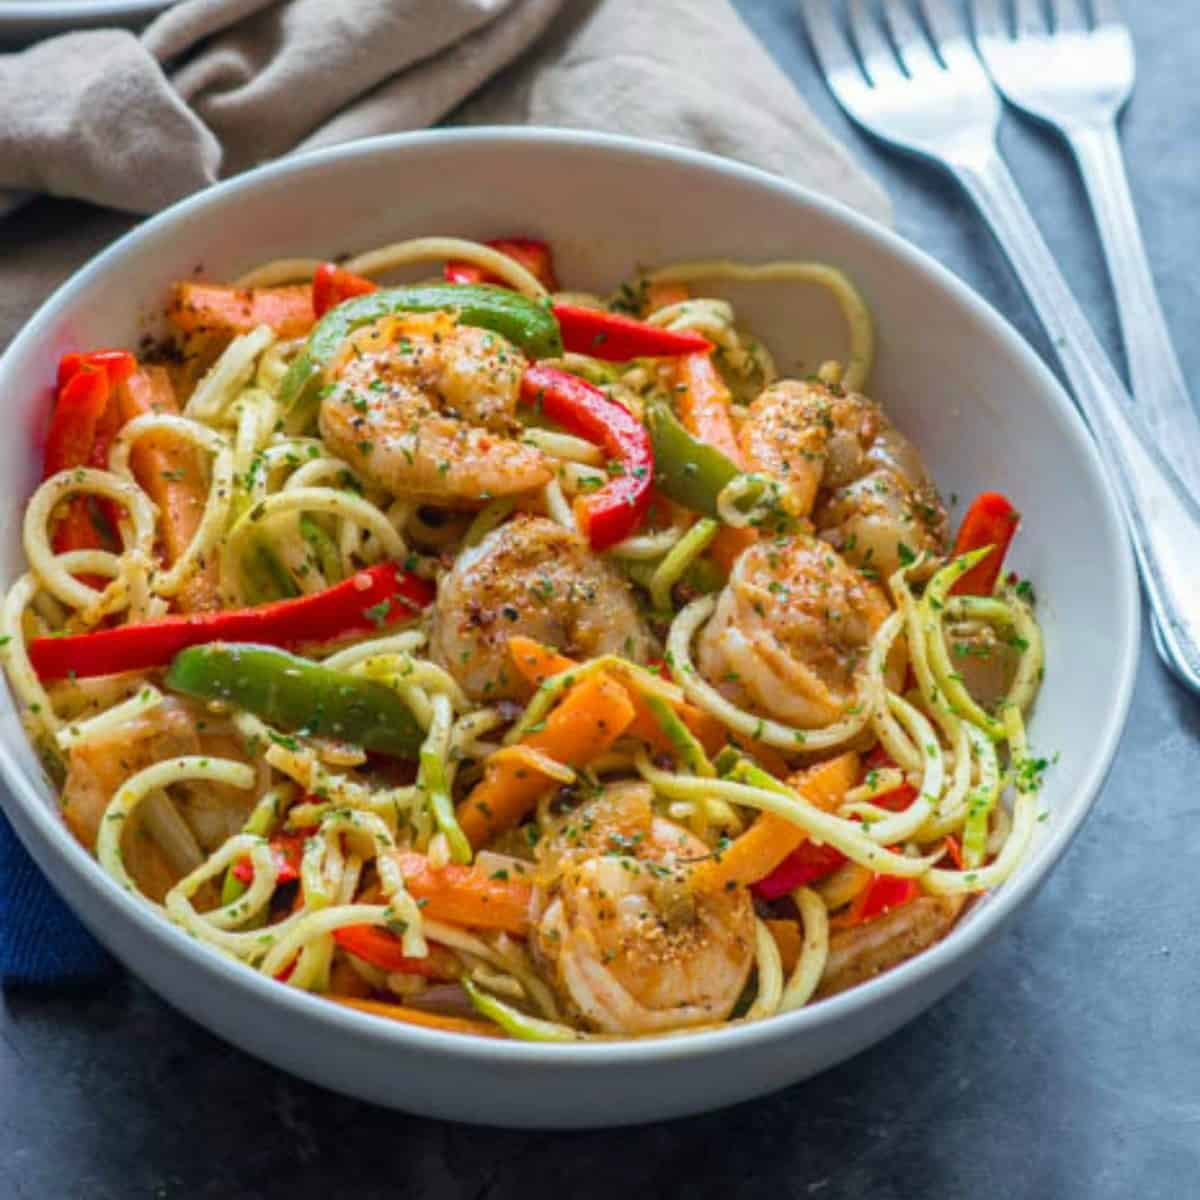 Cajun shrimp with zoodles in a white bowl next to two forks.